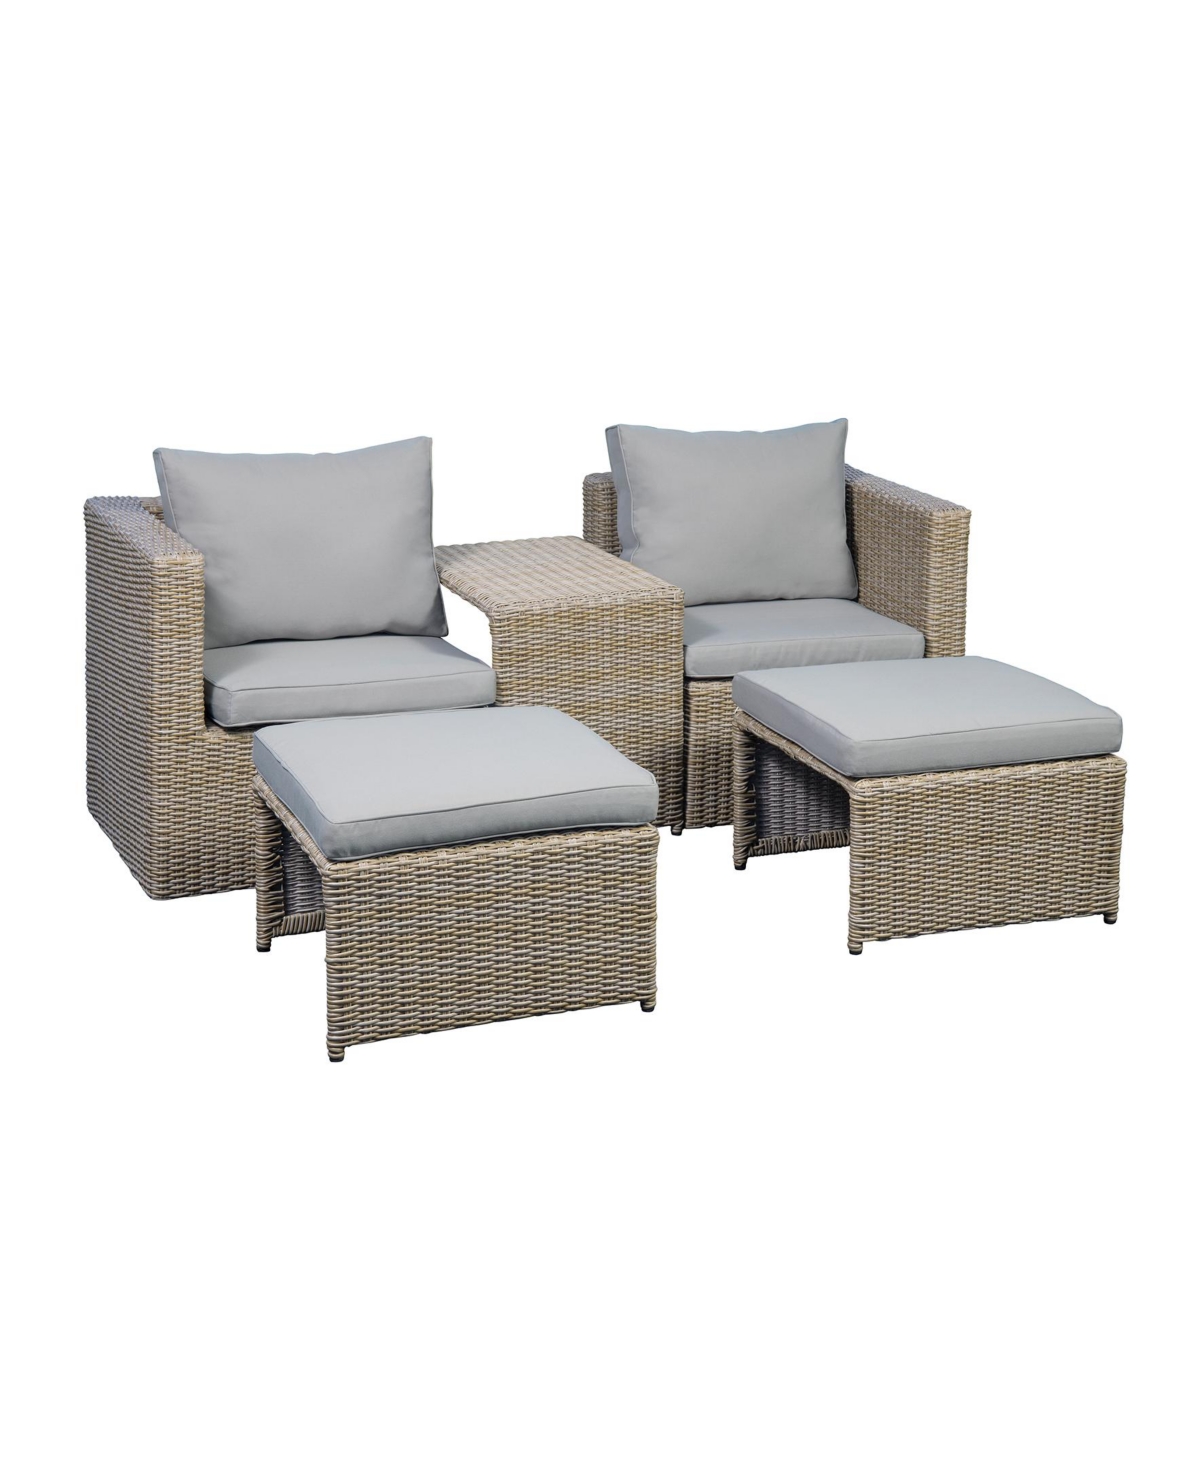 Unique Furniture 5 Piece Polyester, Polyester Blend, Rattan, Steel Modular Sofa With Table, Outdoor Furniture Patio C In Gray